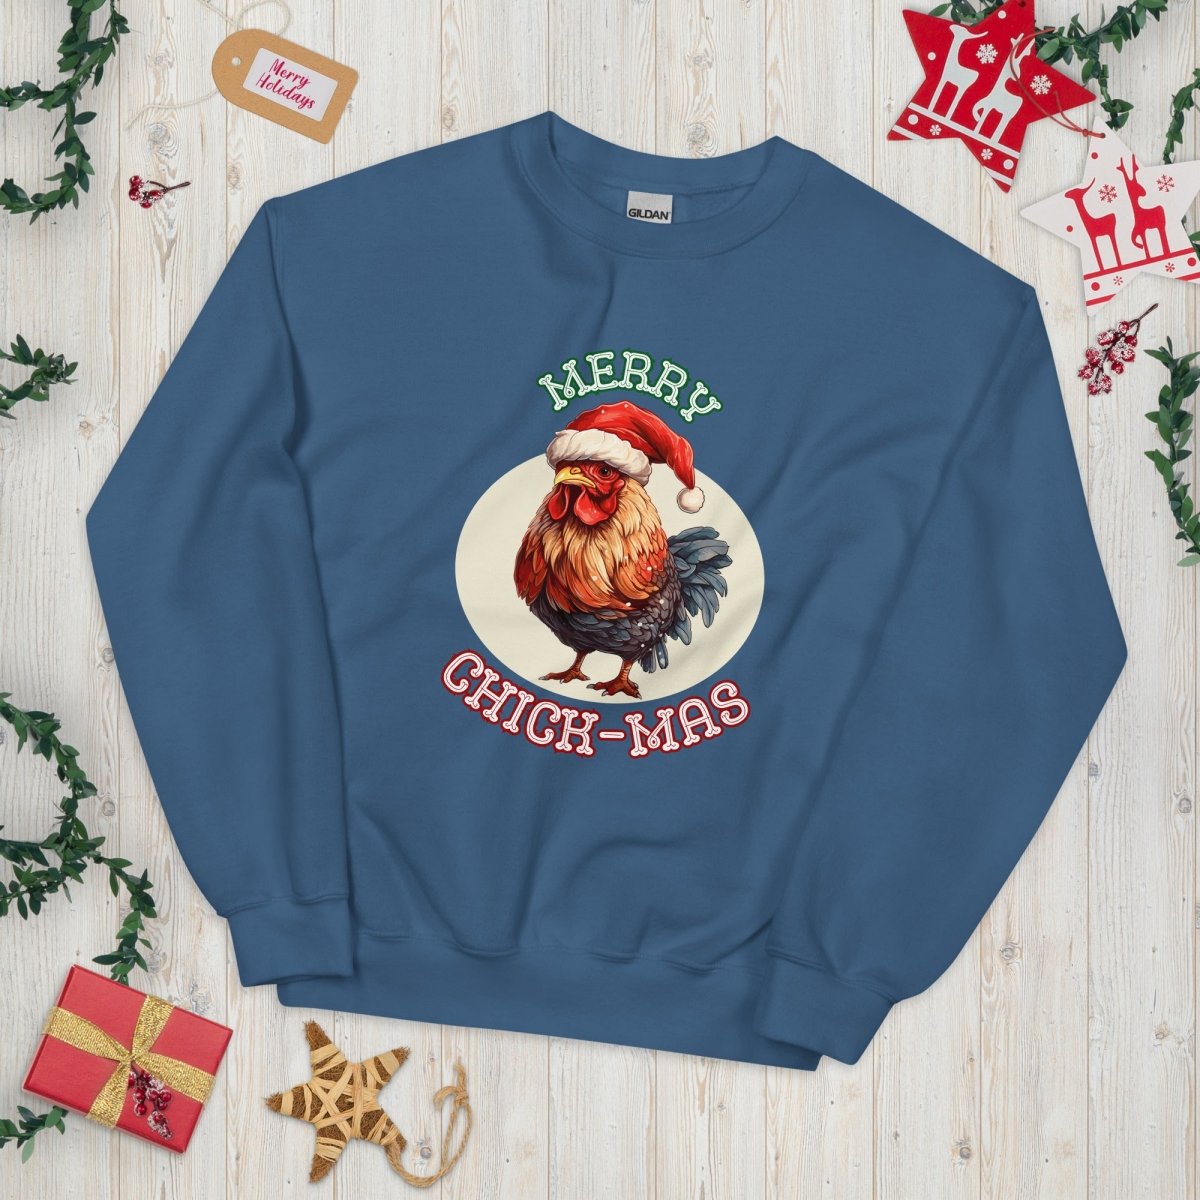 Christmas Chicken Pullover - High Quality Festive Unisex Sweatshirt, Gift for Him, Gift for Chicken Lovers, Funny Farm Animal Xmas Sweater - Everything Pixel